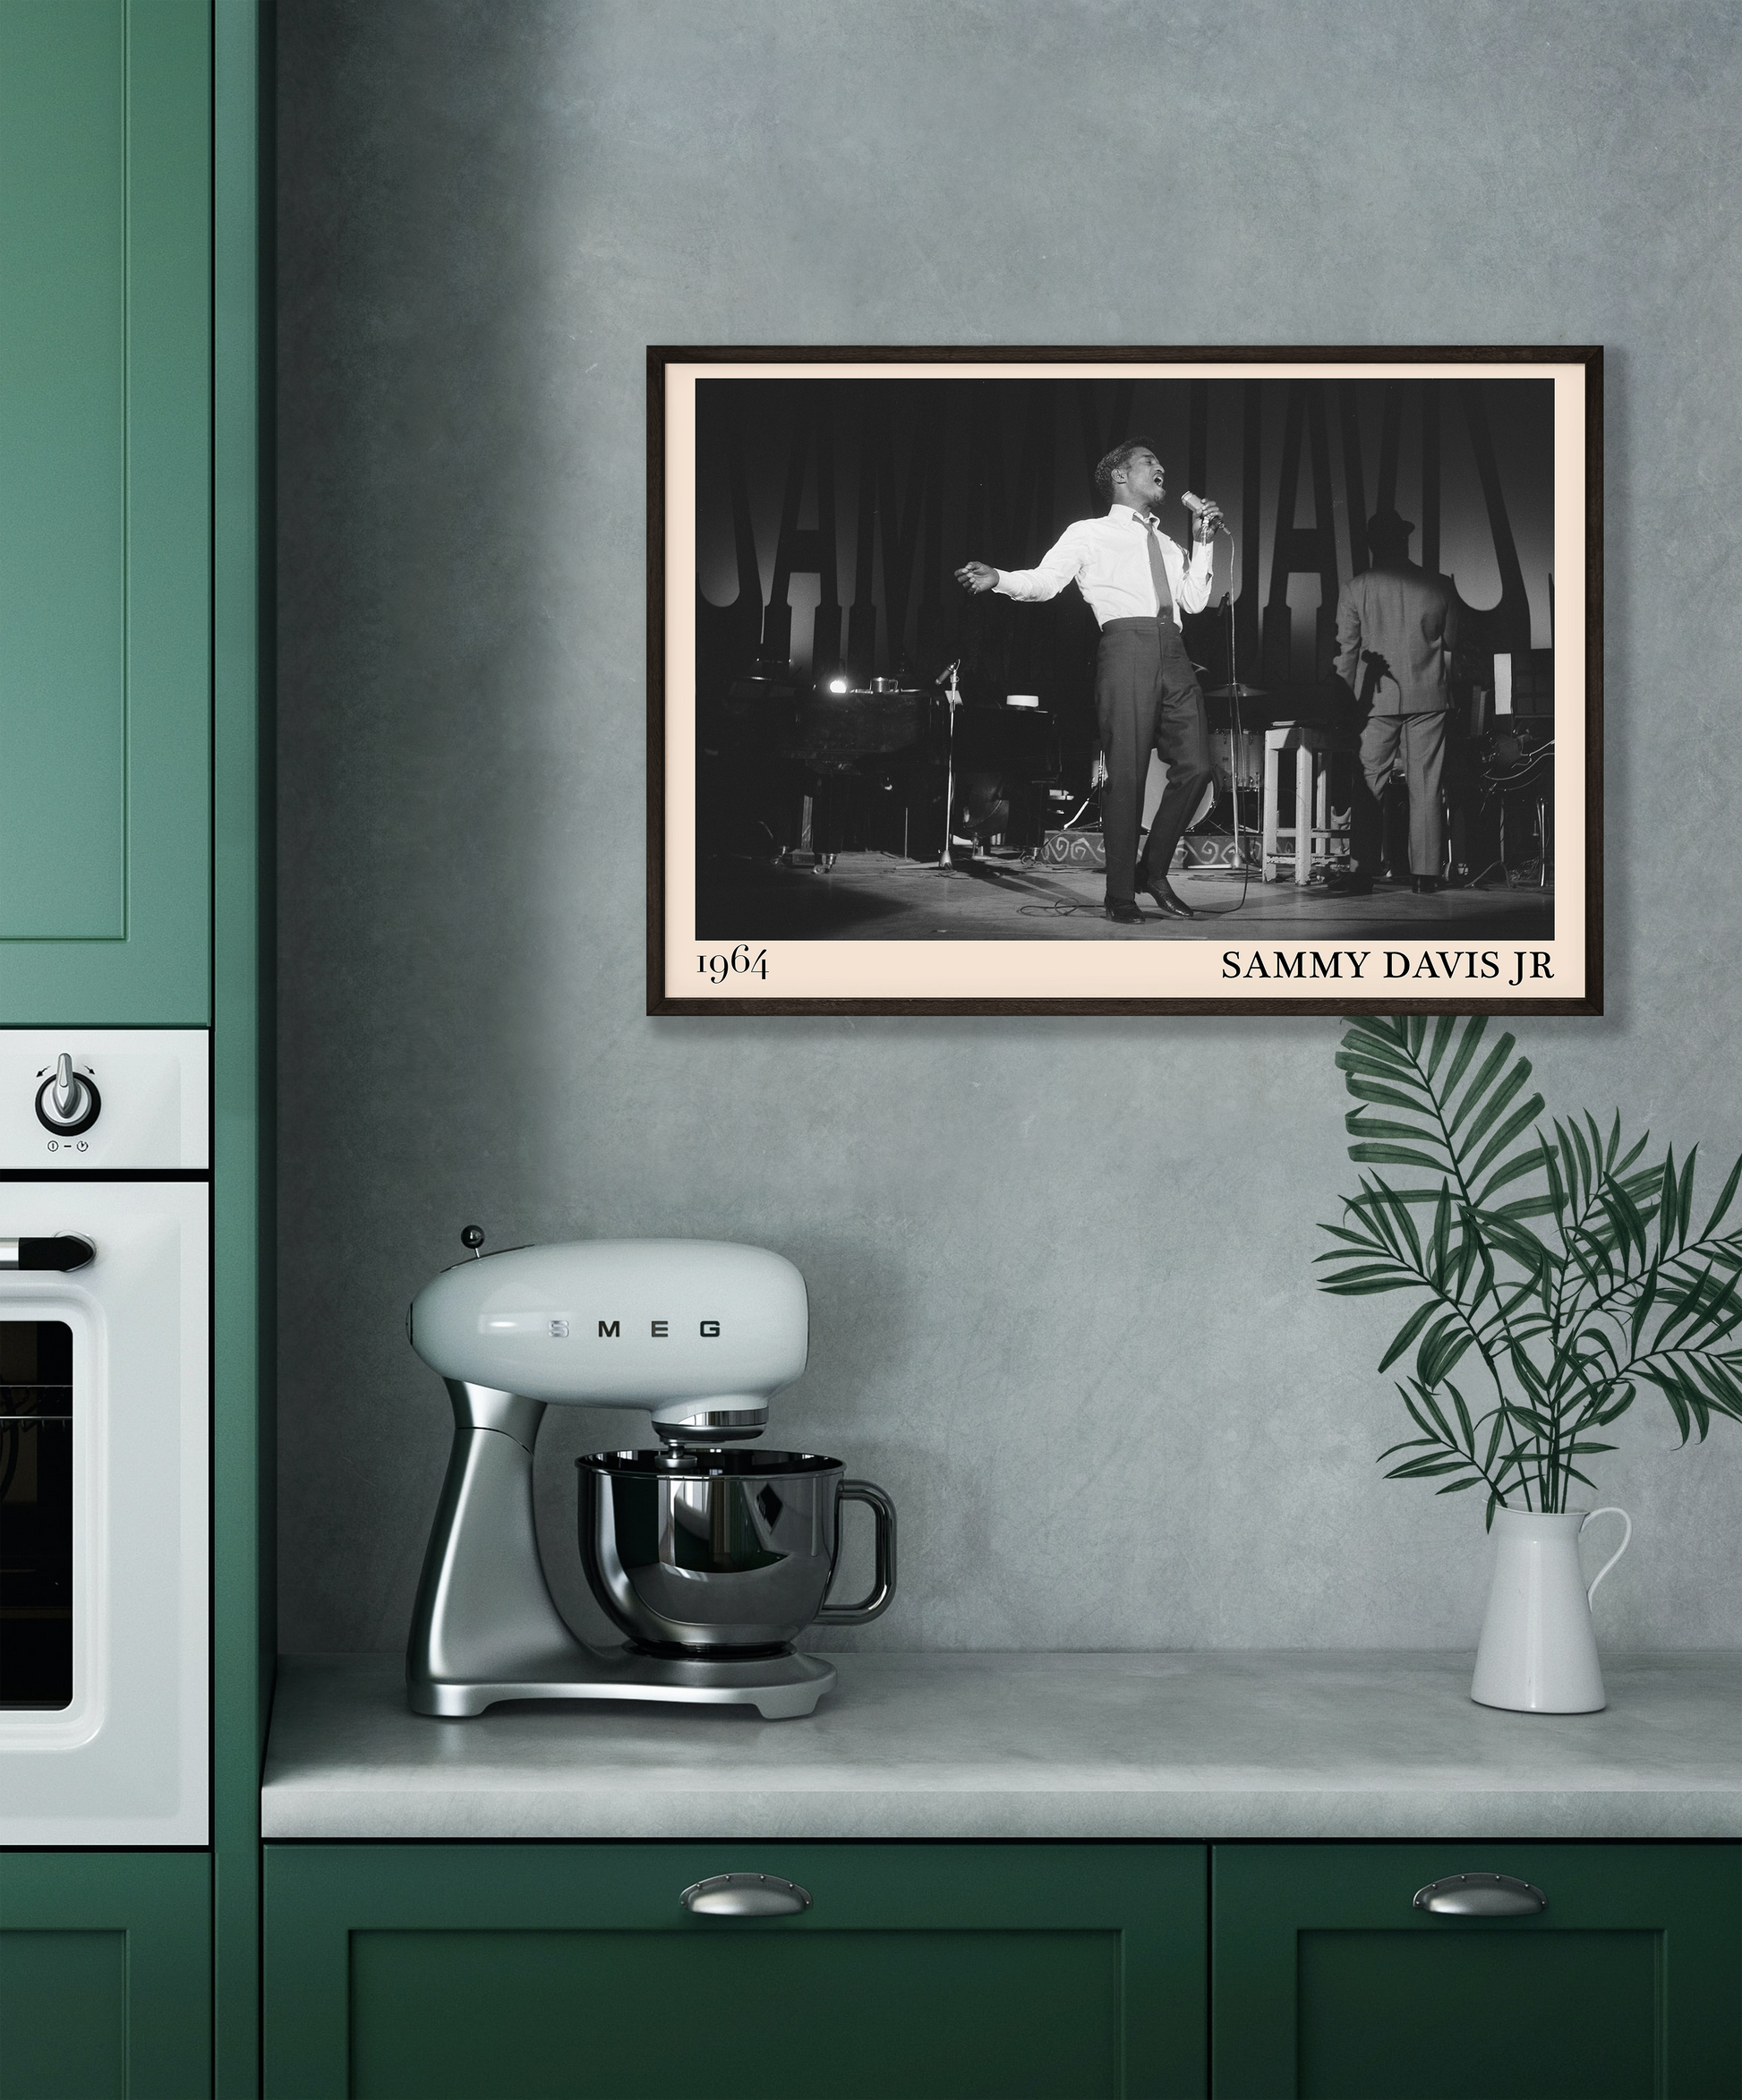 1964 picture of Sammy Davis Jr singing.Picture crafted into a cool black framed music print, with an off-white border. Poster is hanging on a grey kitchen wall.